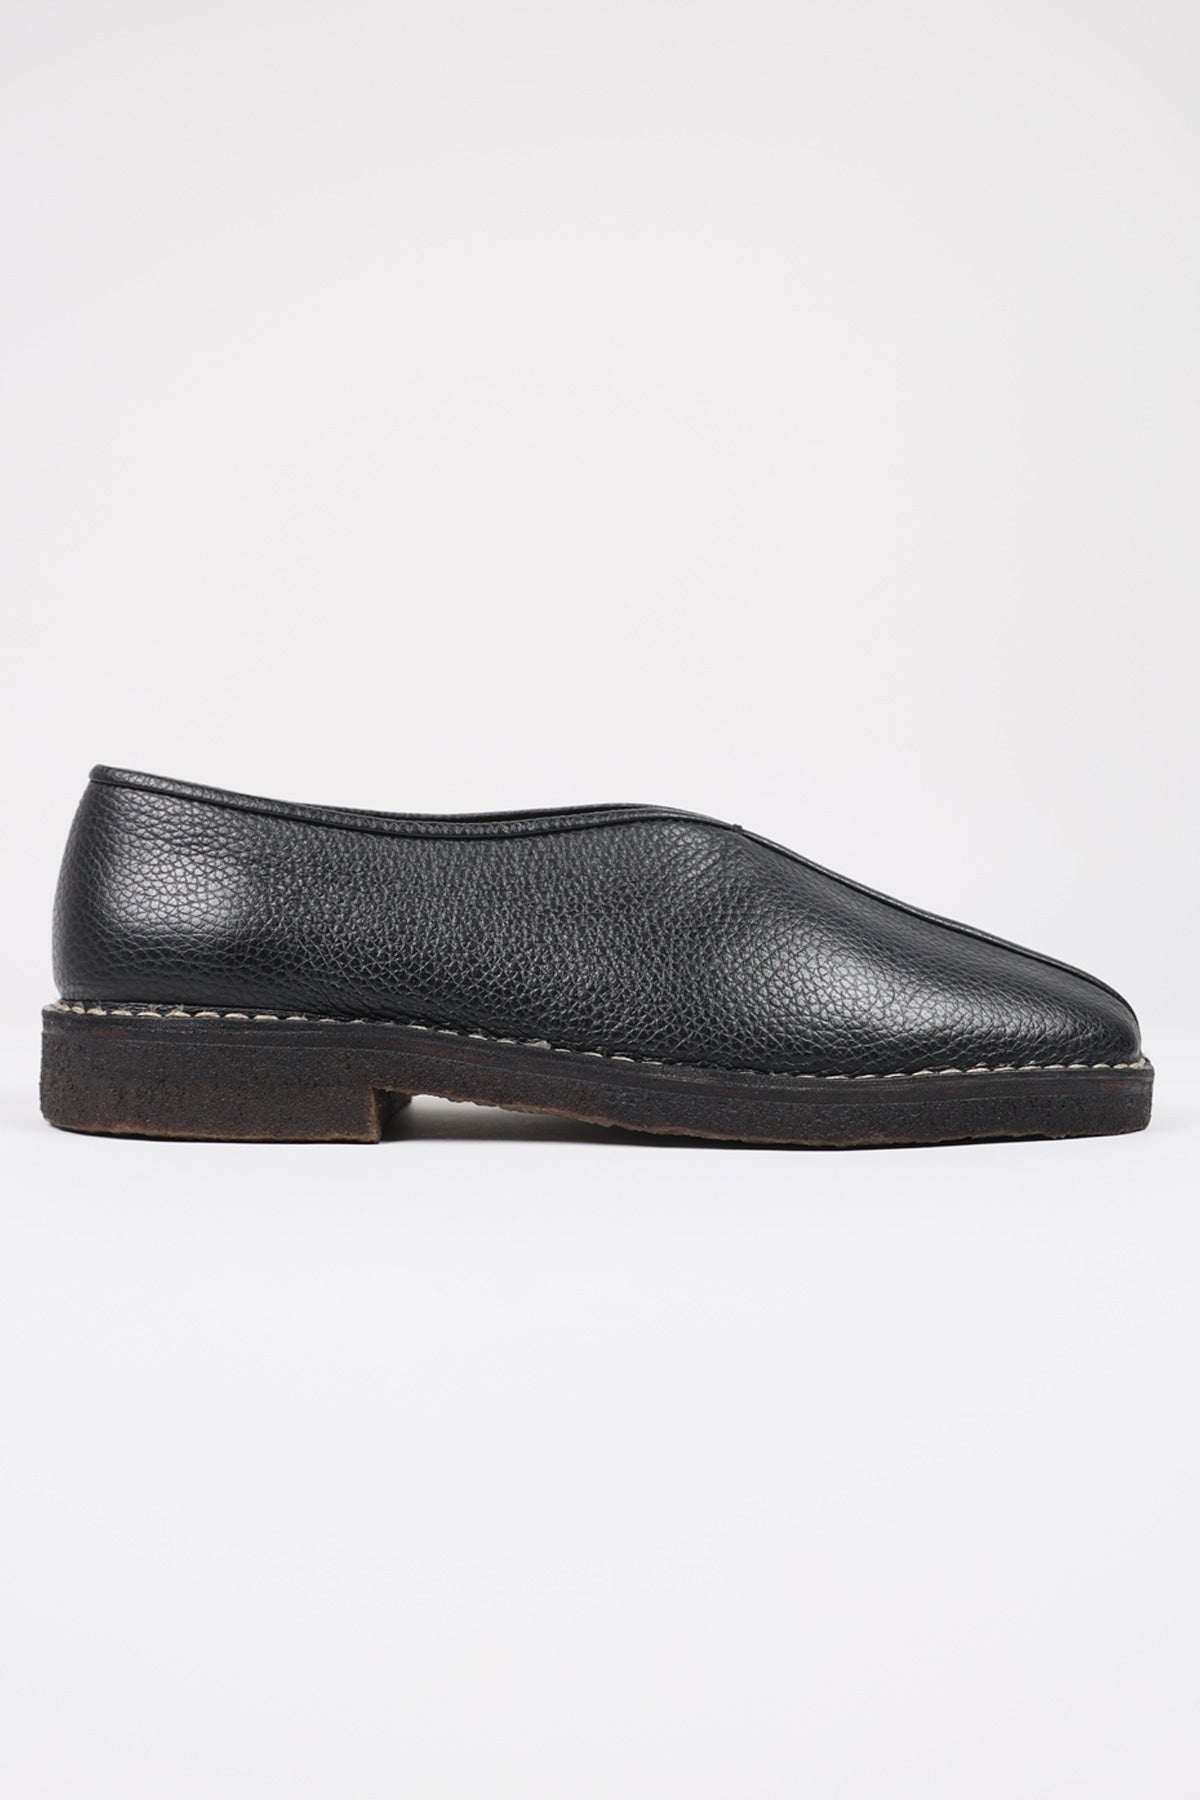 Piped Crepe Slippers - Black